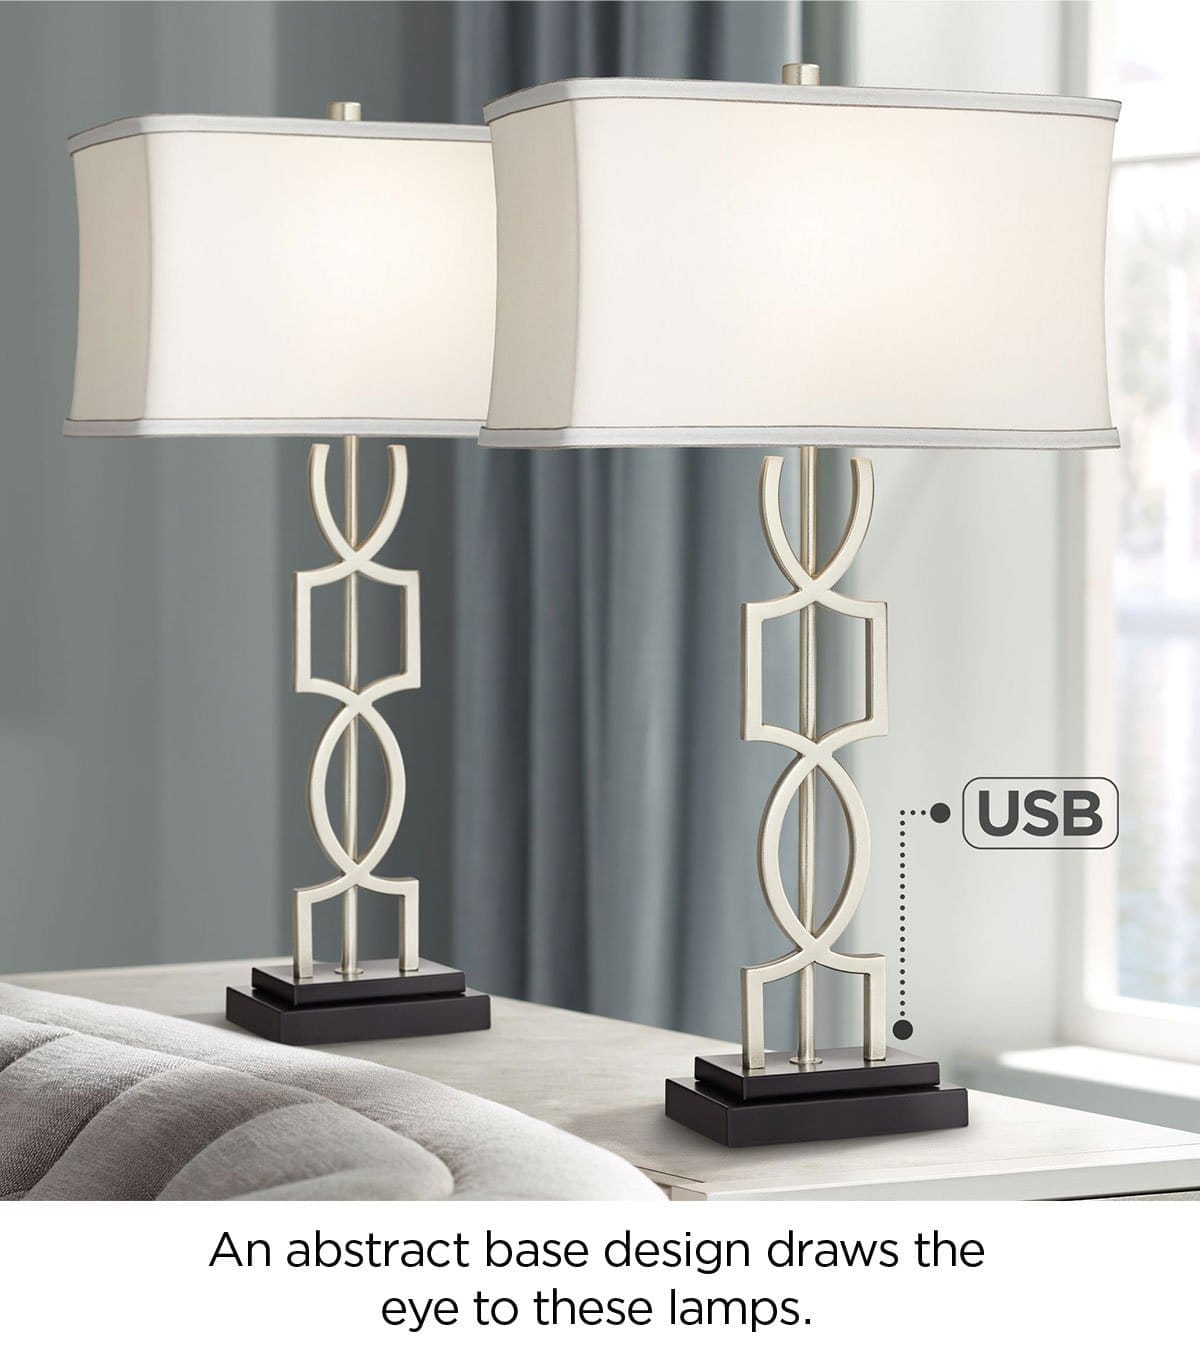 An abstract base design draws the eye to these lamps.